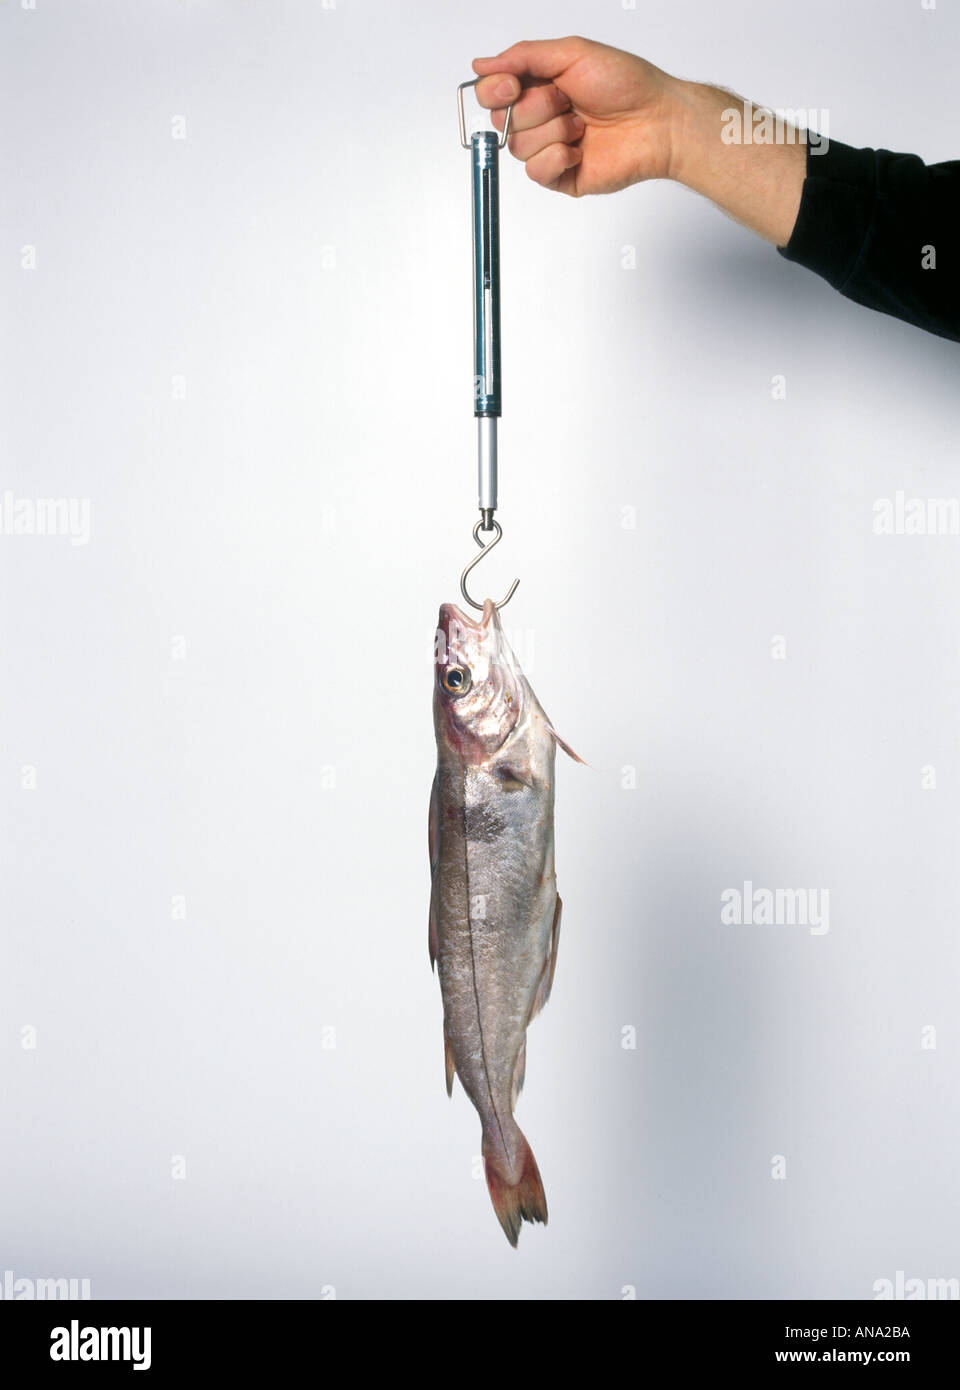 weighing a fish on a spring balance Stock Photo - Alamy